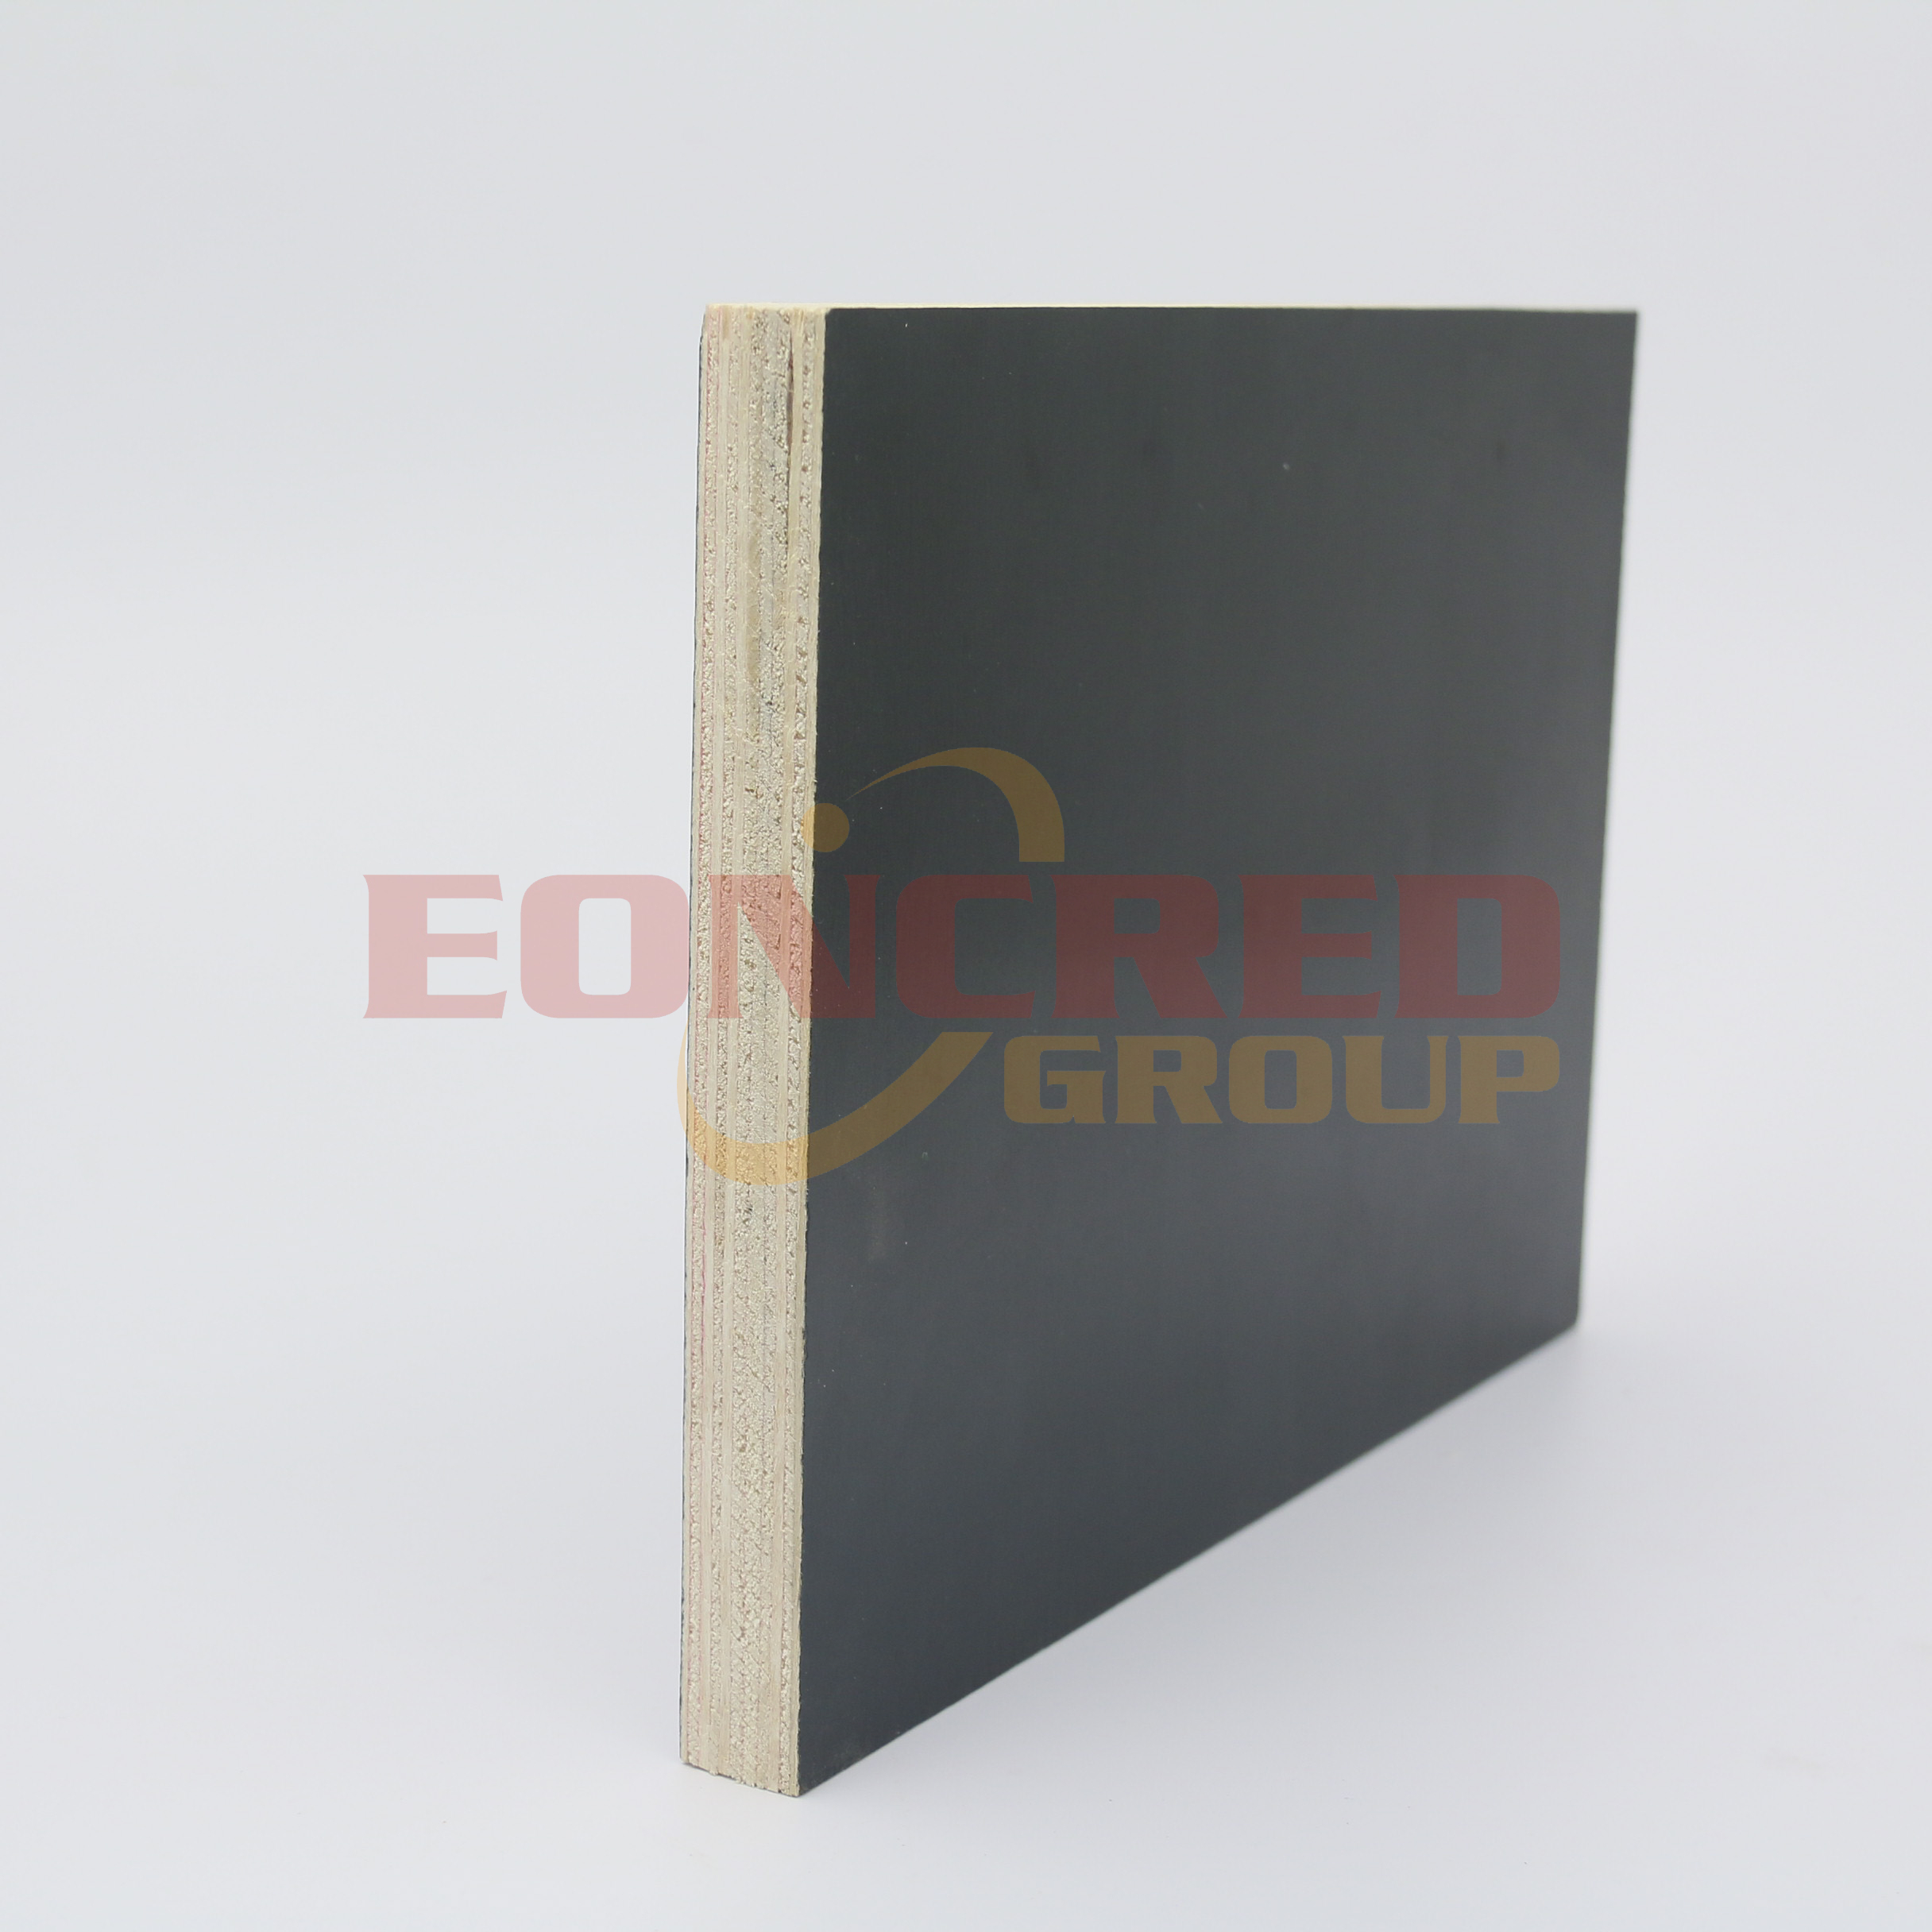 Black Film Faced Plywood/ Plywood Hot Sale 15mm Black Film Faced Plywood/ Construction Plywood/marine Plywood